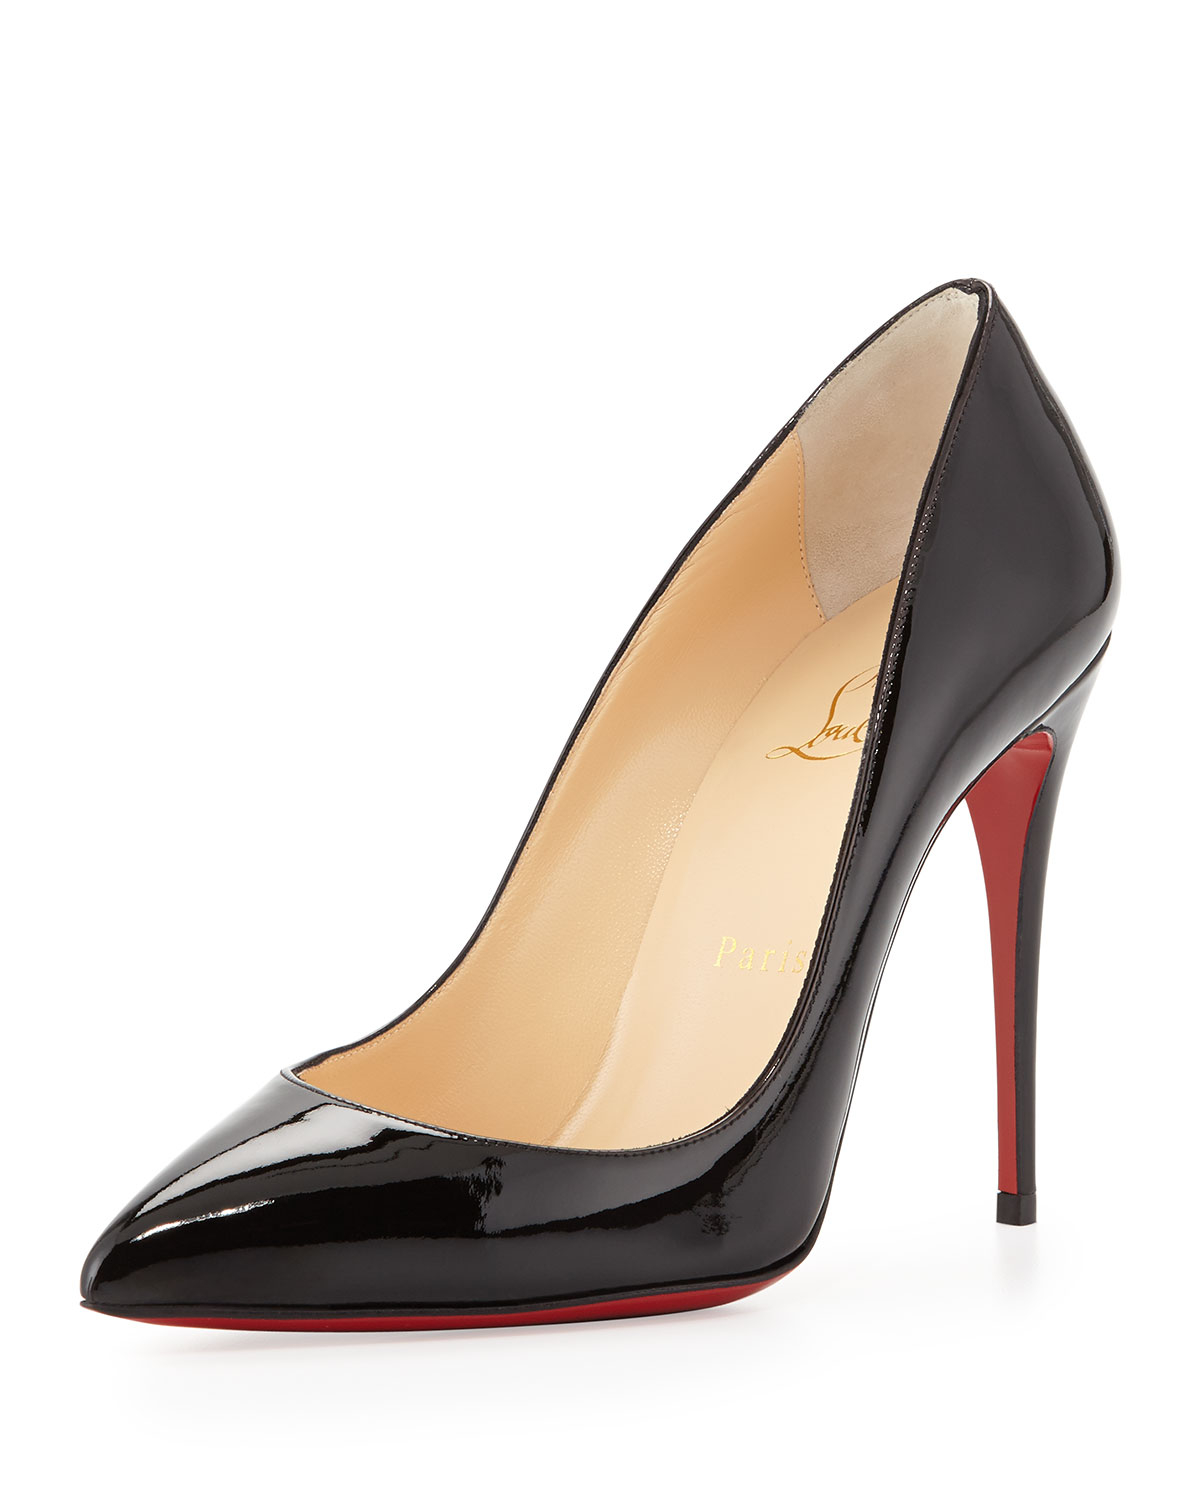 Lyst - Christian Louboutin Pigalle Follies Patent Leather Pumps in Black